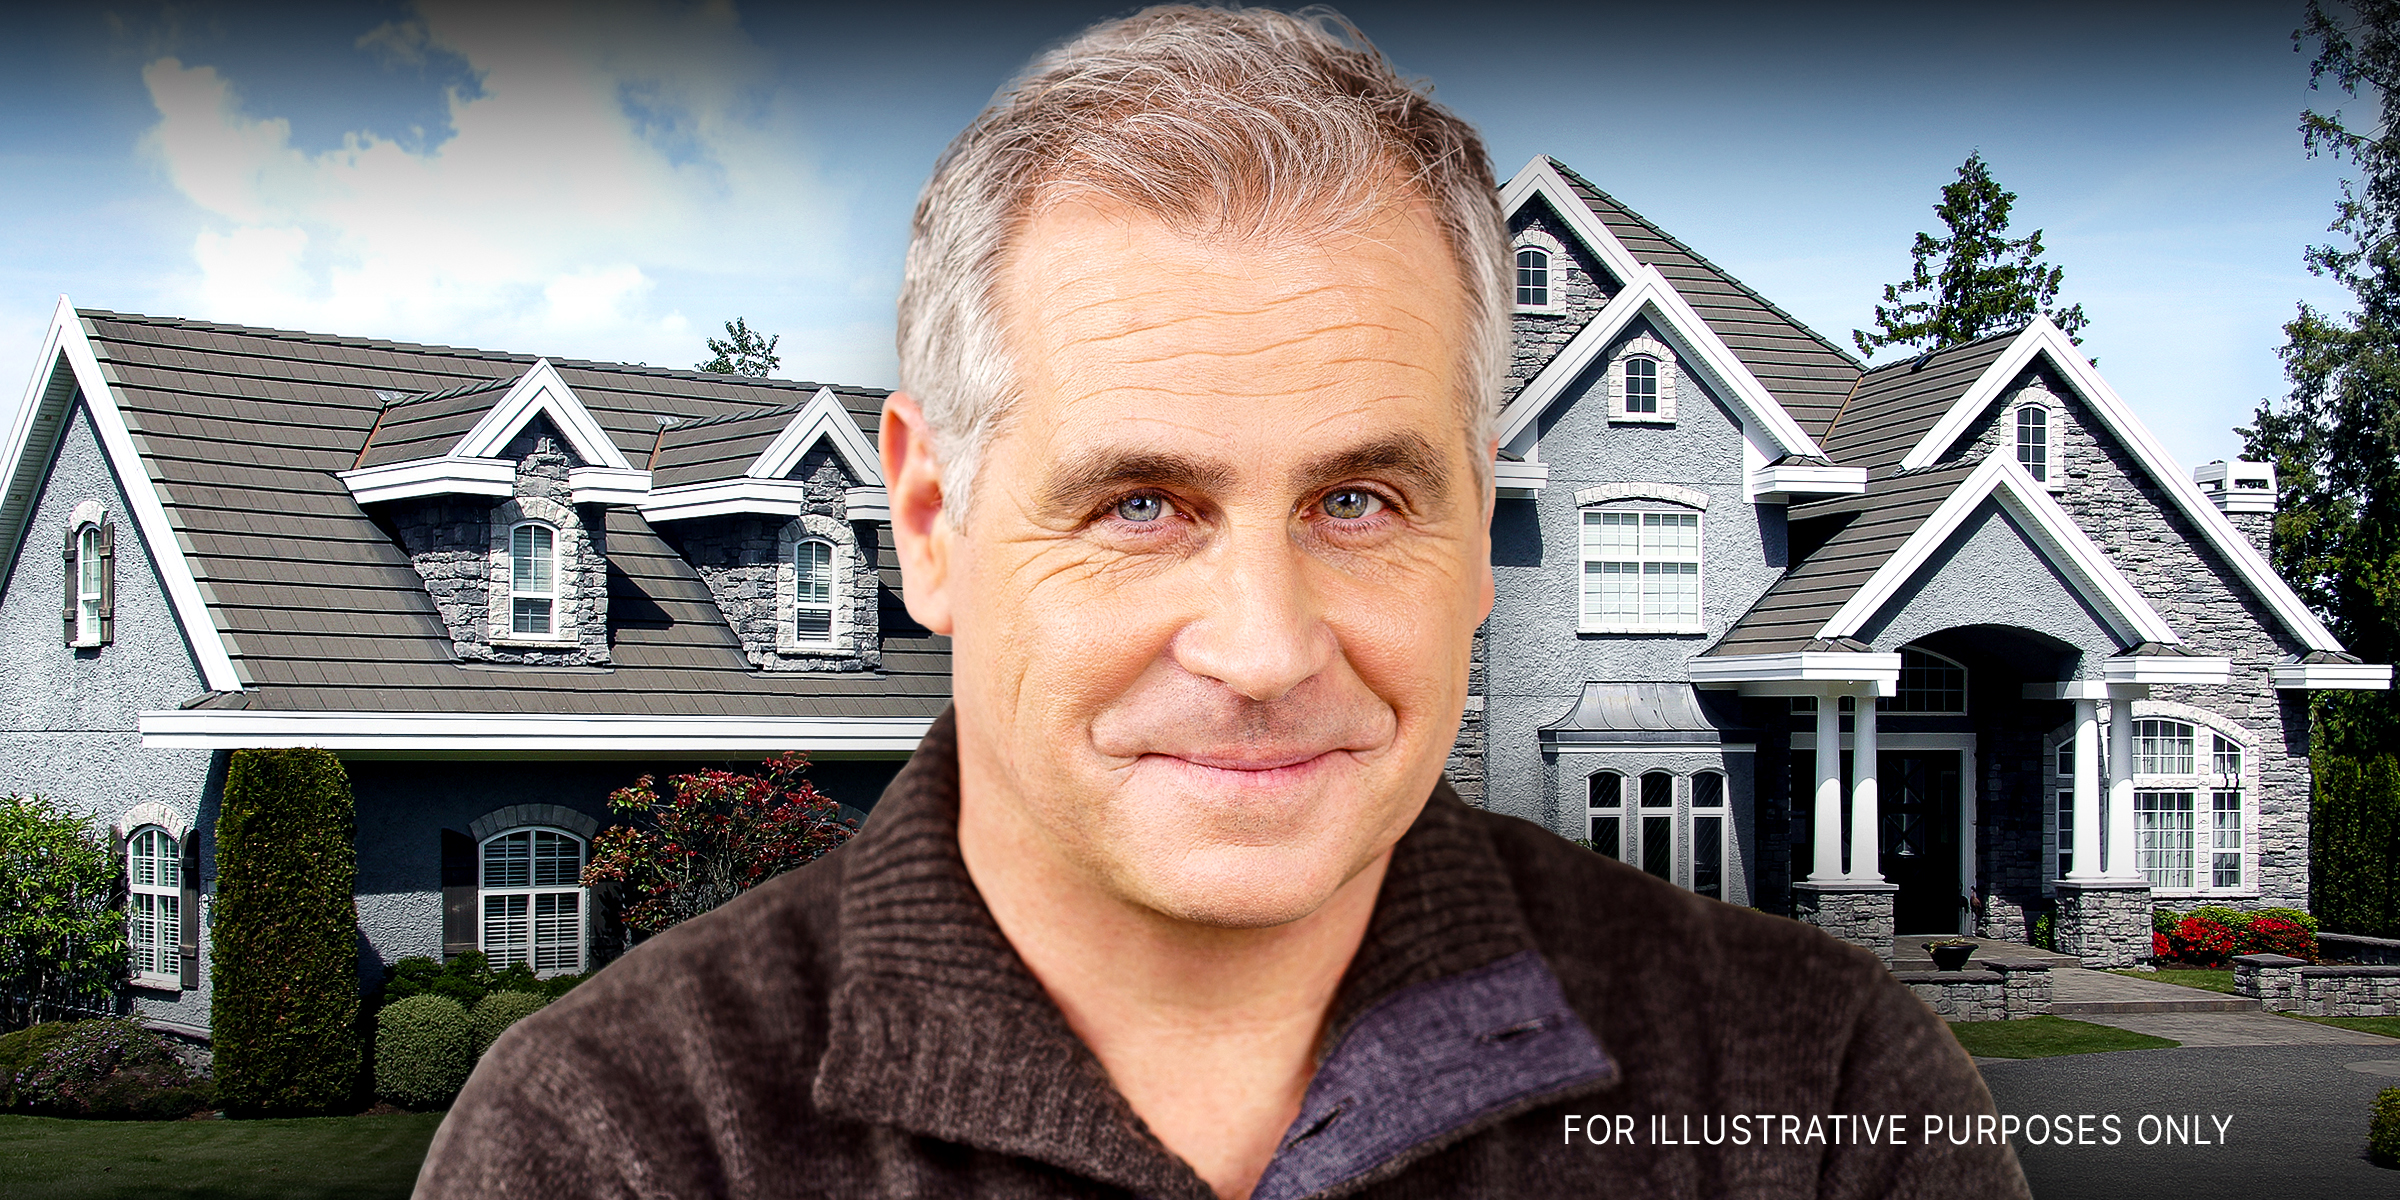 A middle-aged man smiling against the backdrop of a mansion | Source: Shutterstock